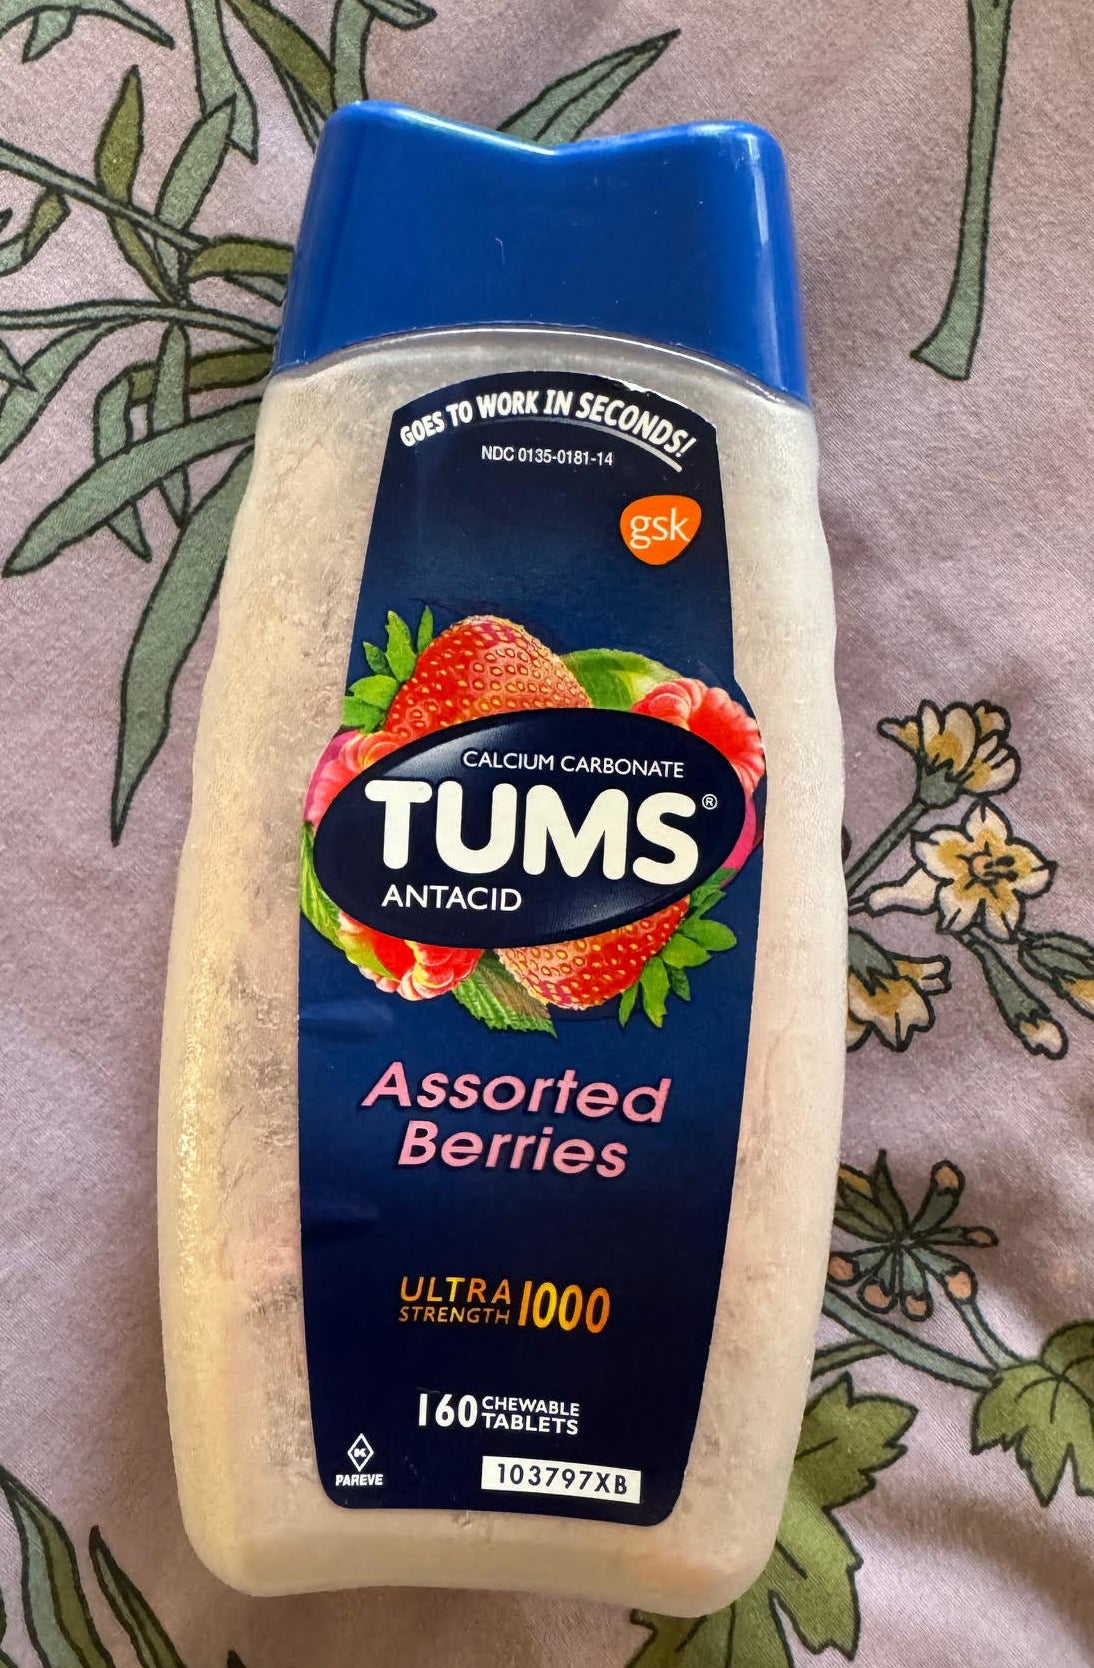 Bottle of TUMS Antacid with &#x27;Assorted Berries&#x27; flavor lying on a floral background